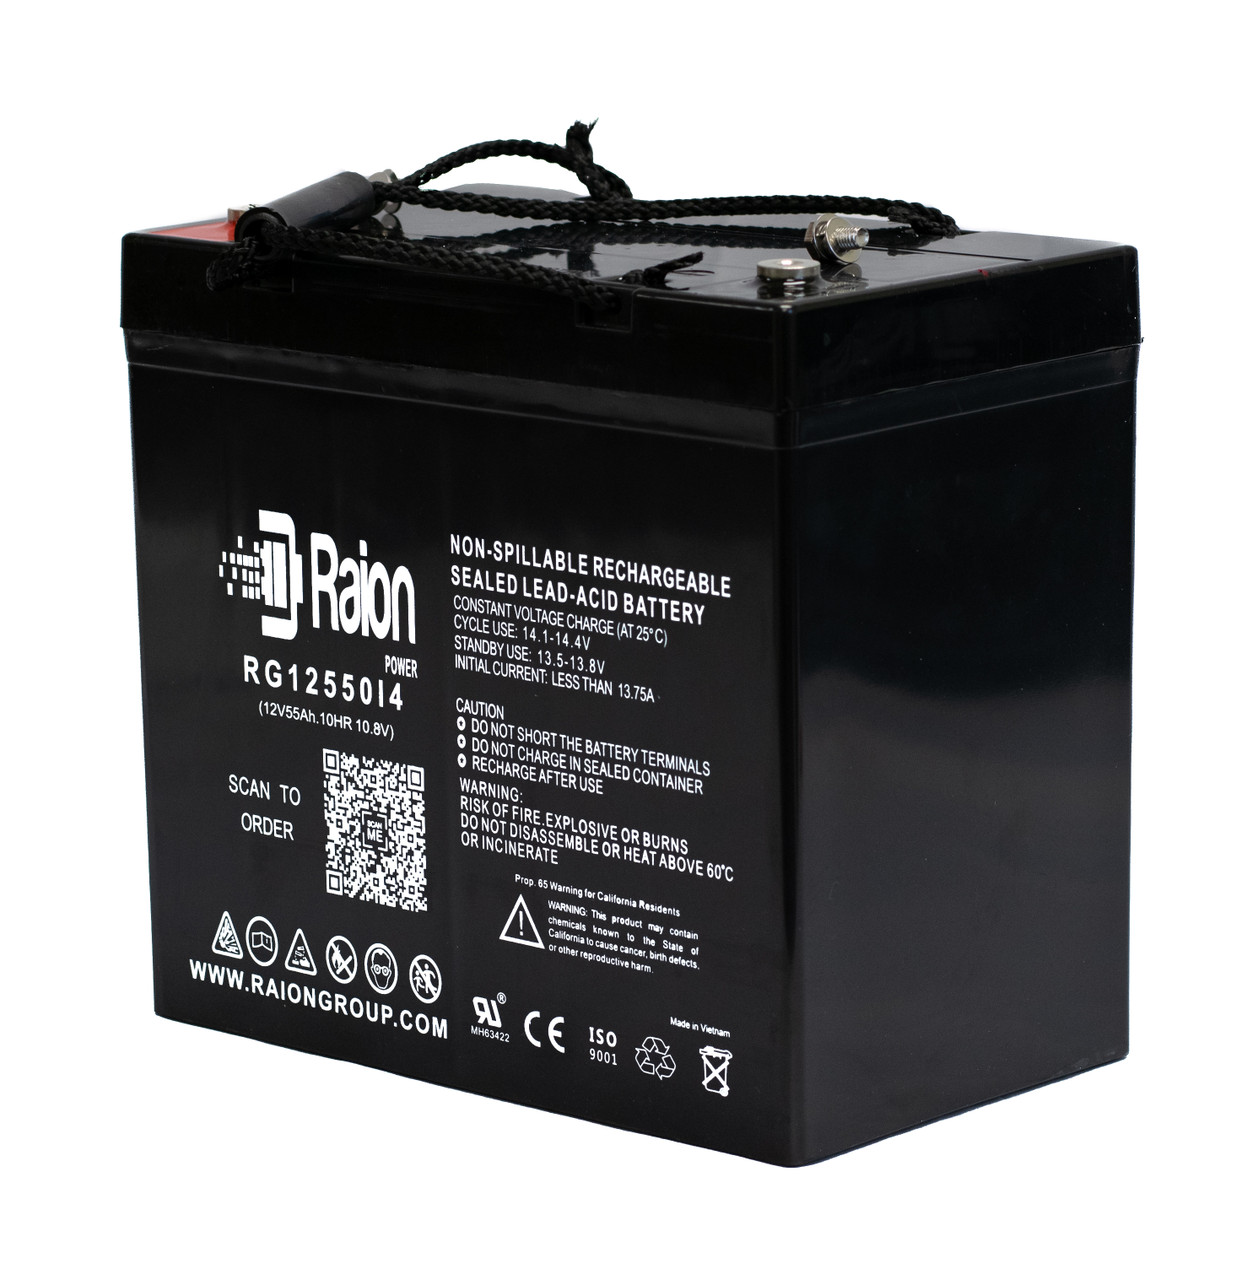 Raion Power 12V 55Ah 22NF Mobility Scooter Battery Replacement for Merits Health Products P200-2S S (MP-2)